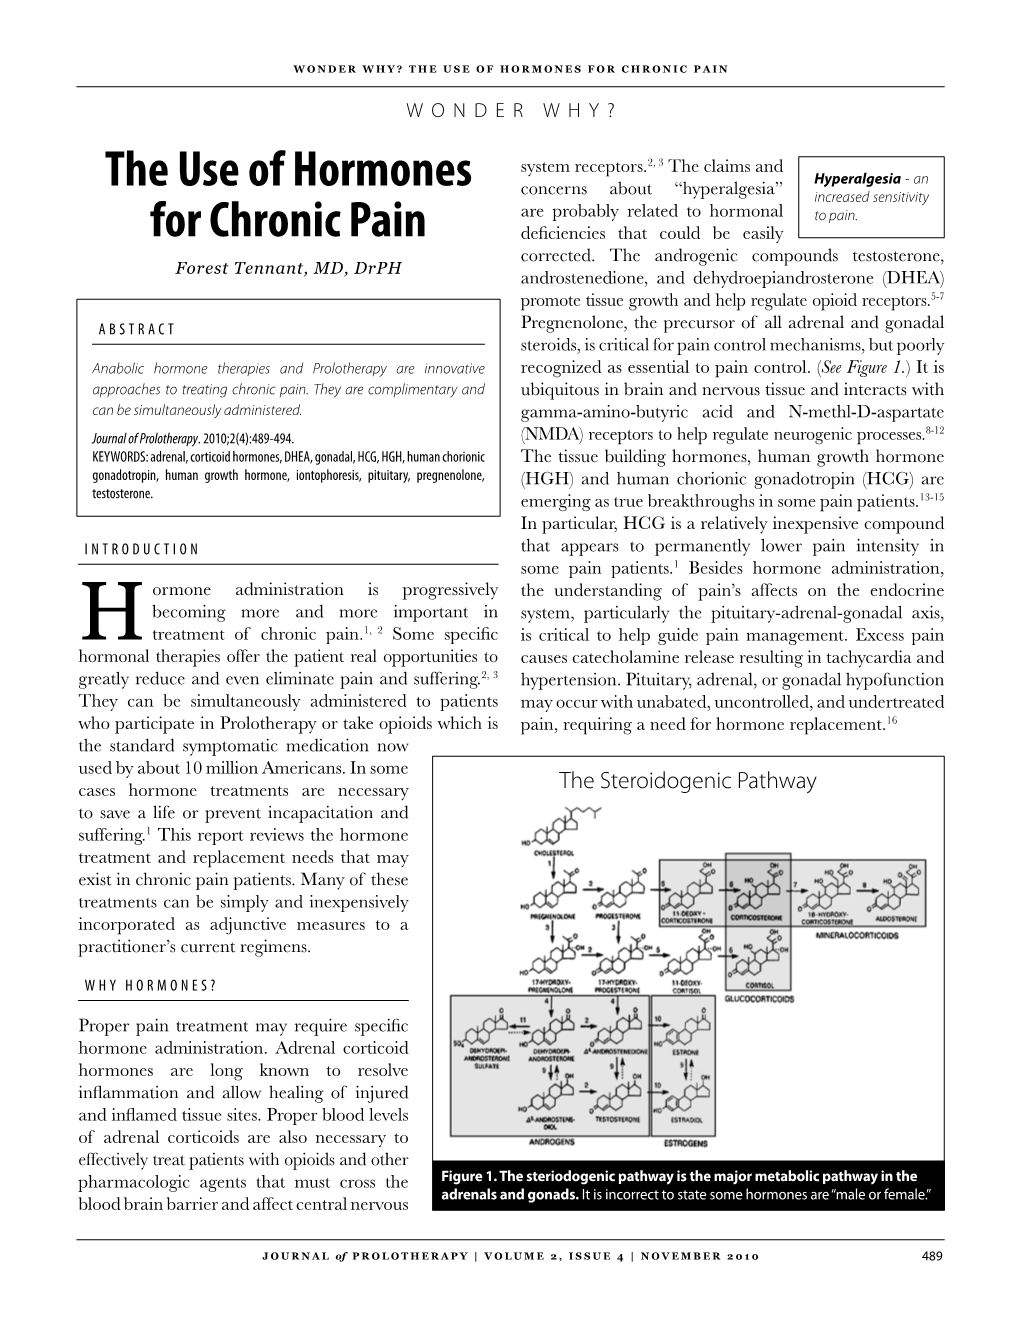 The Use of Hormones for Chronic Pain